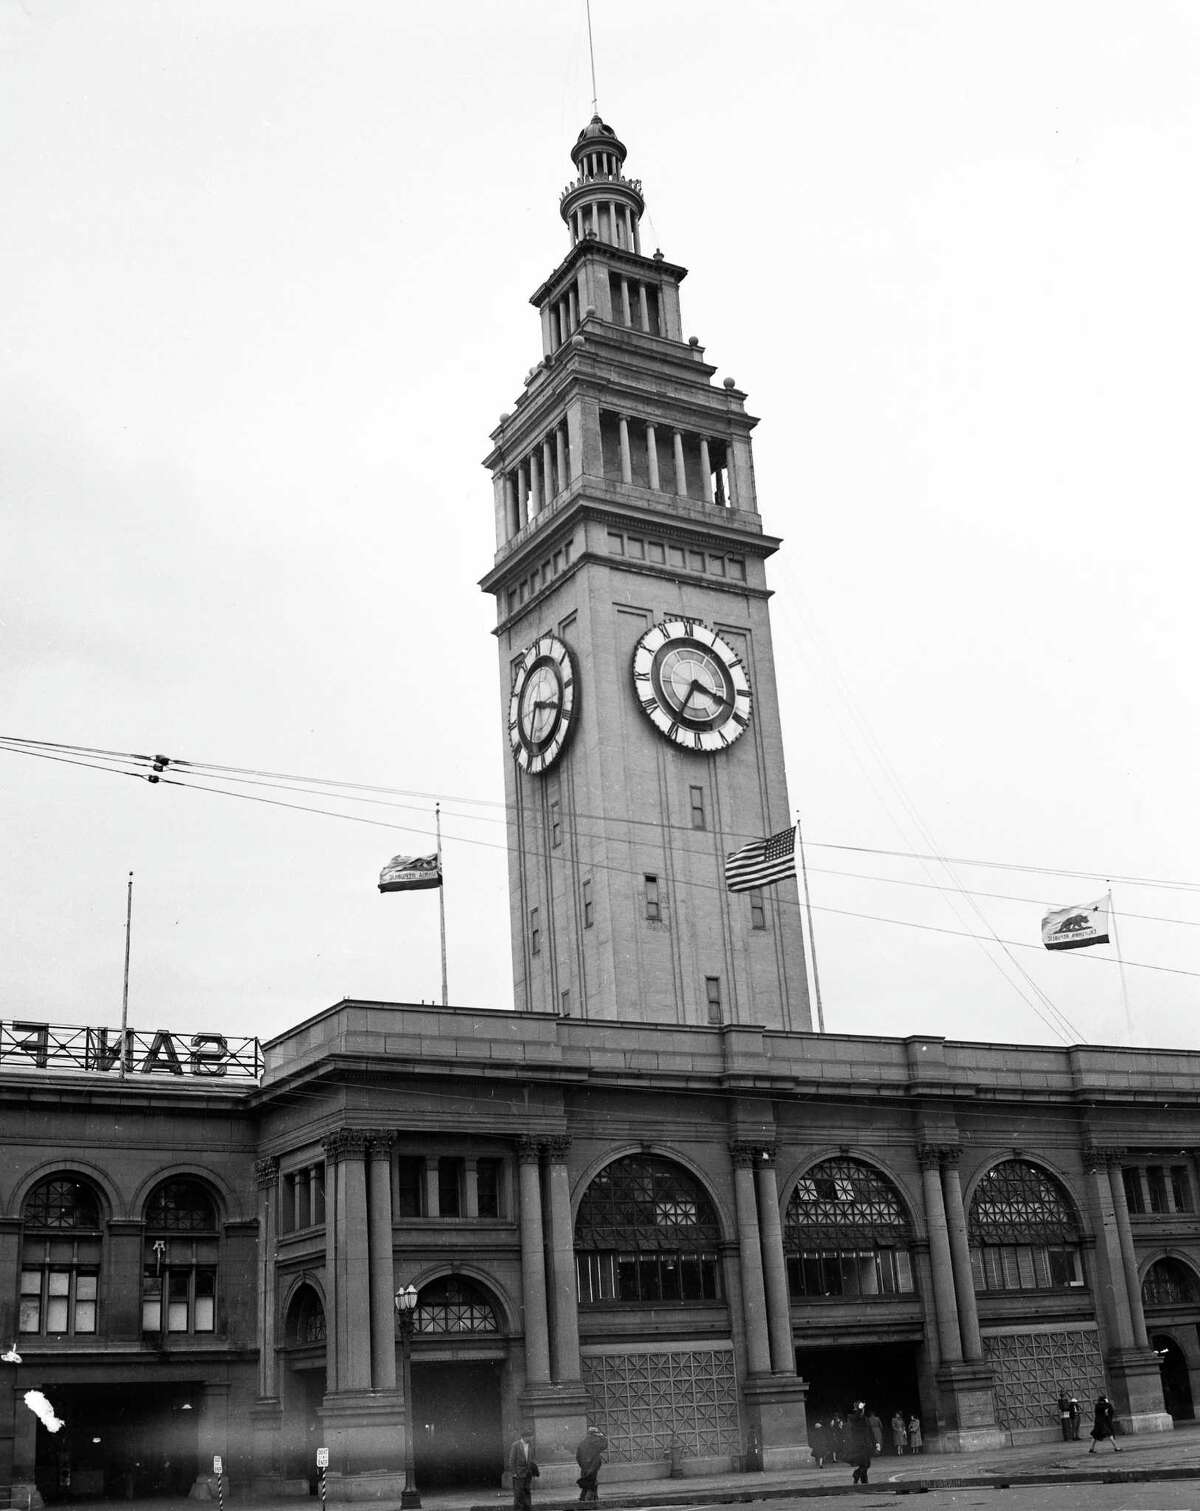 Plans over the years had all but the Ferry Building’s clock tower, shown in 1948, demolished.